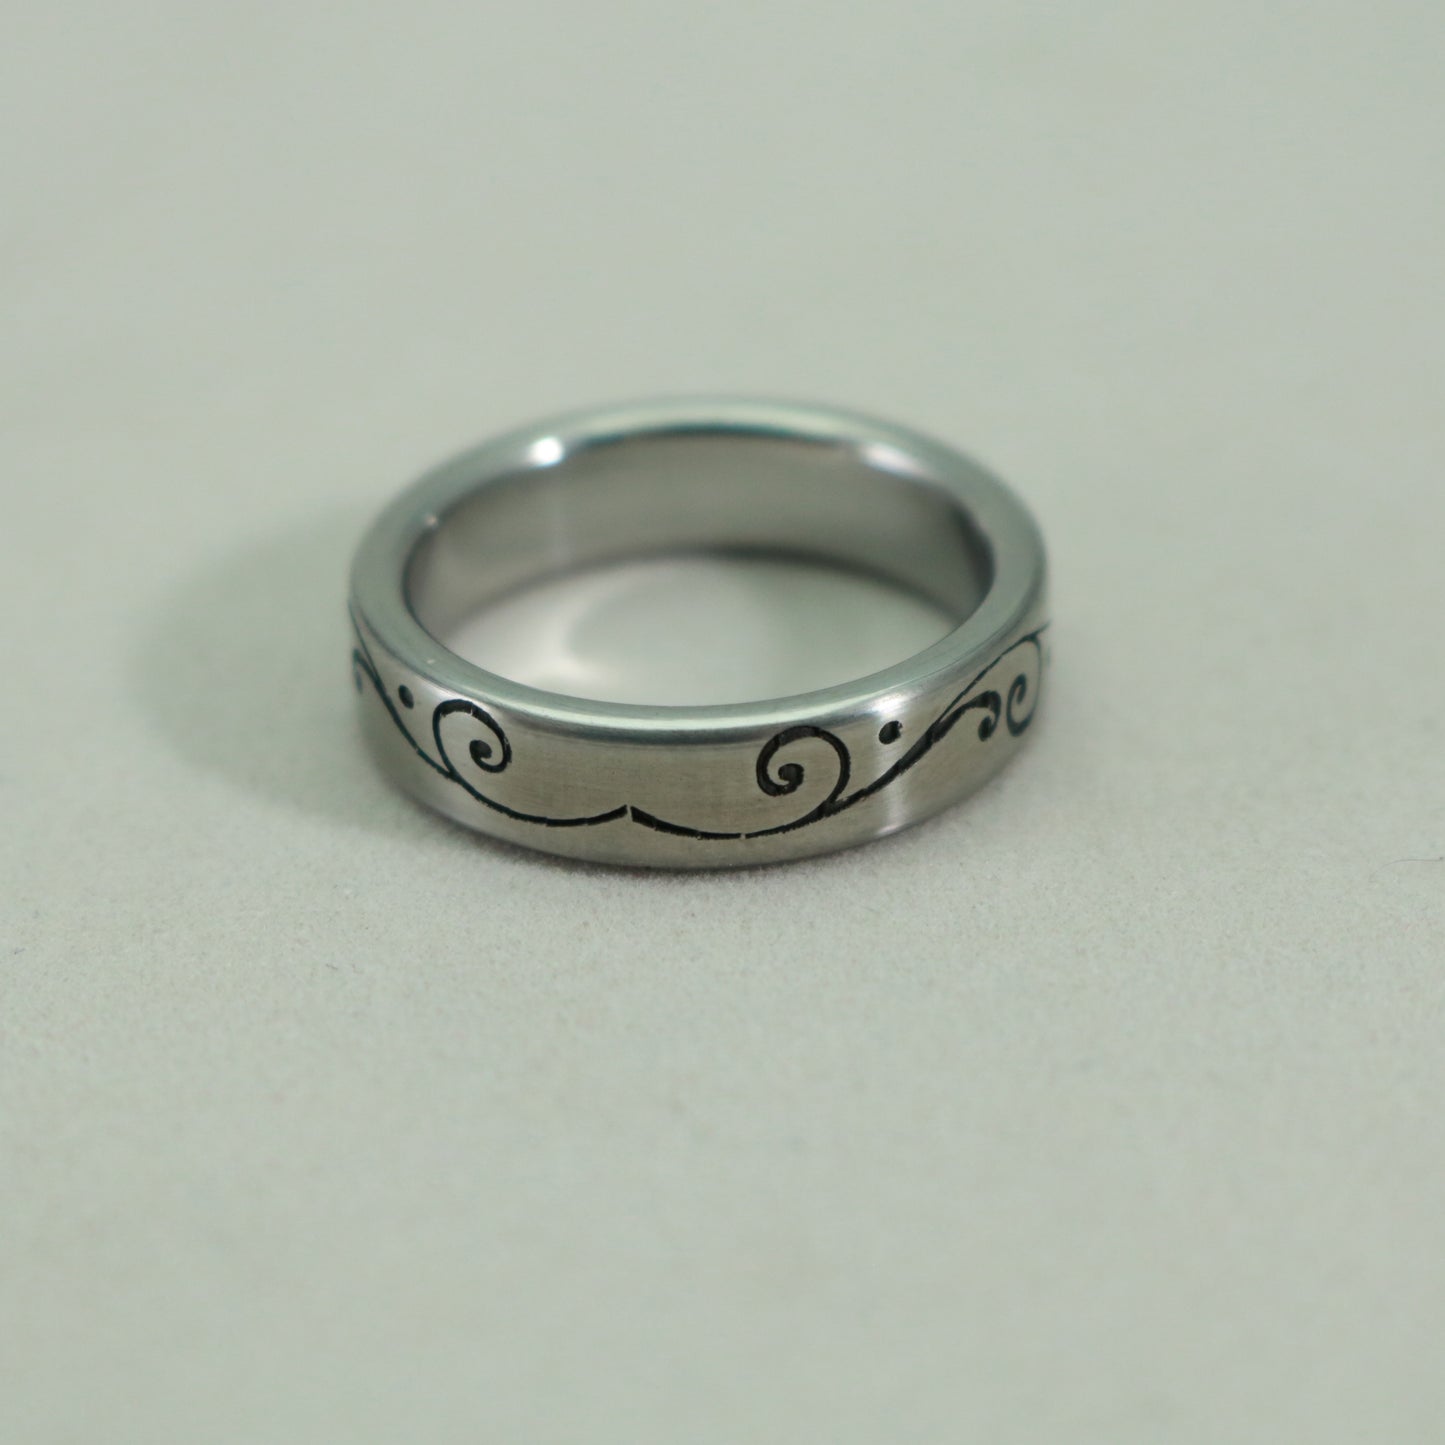 Stainless steel ring in size 7 1/4 with a laser engraved floral pattern